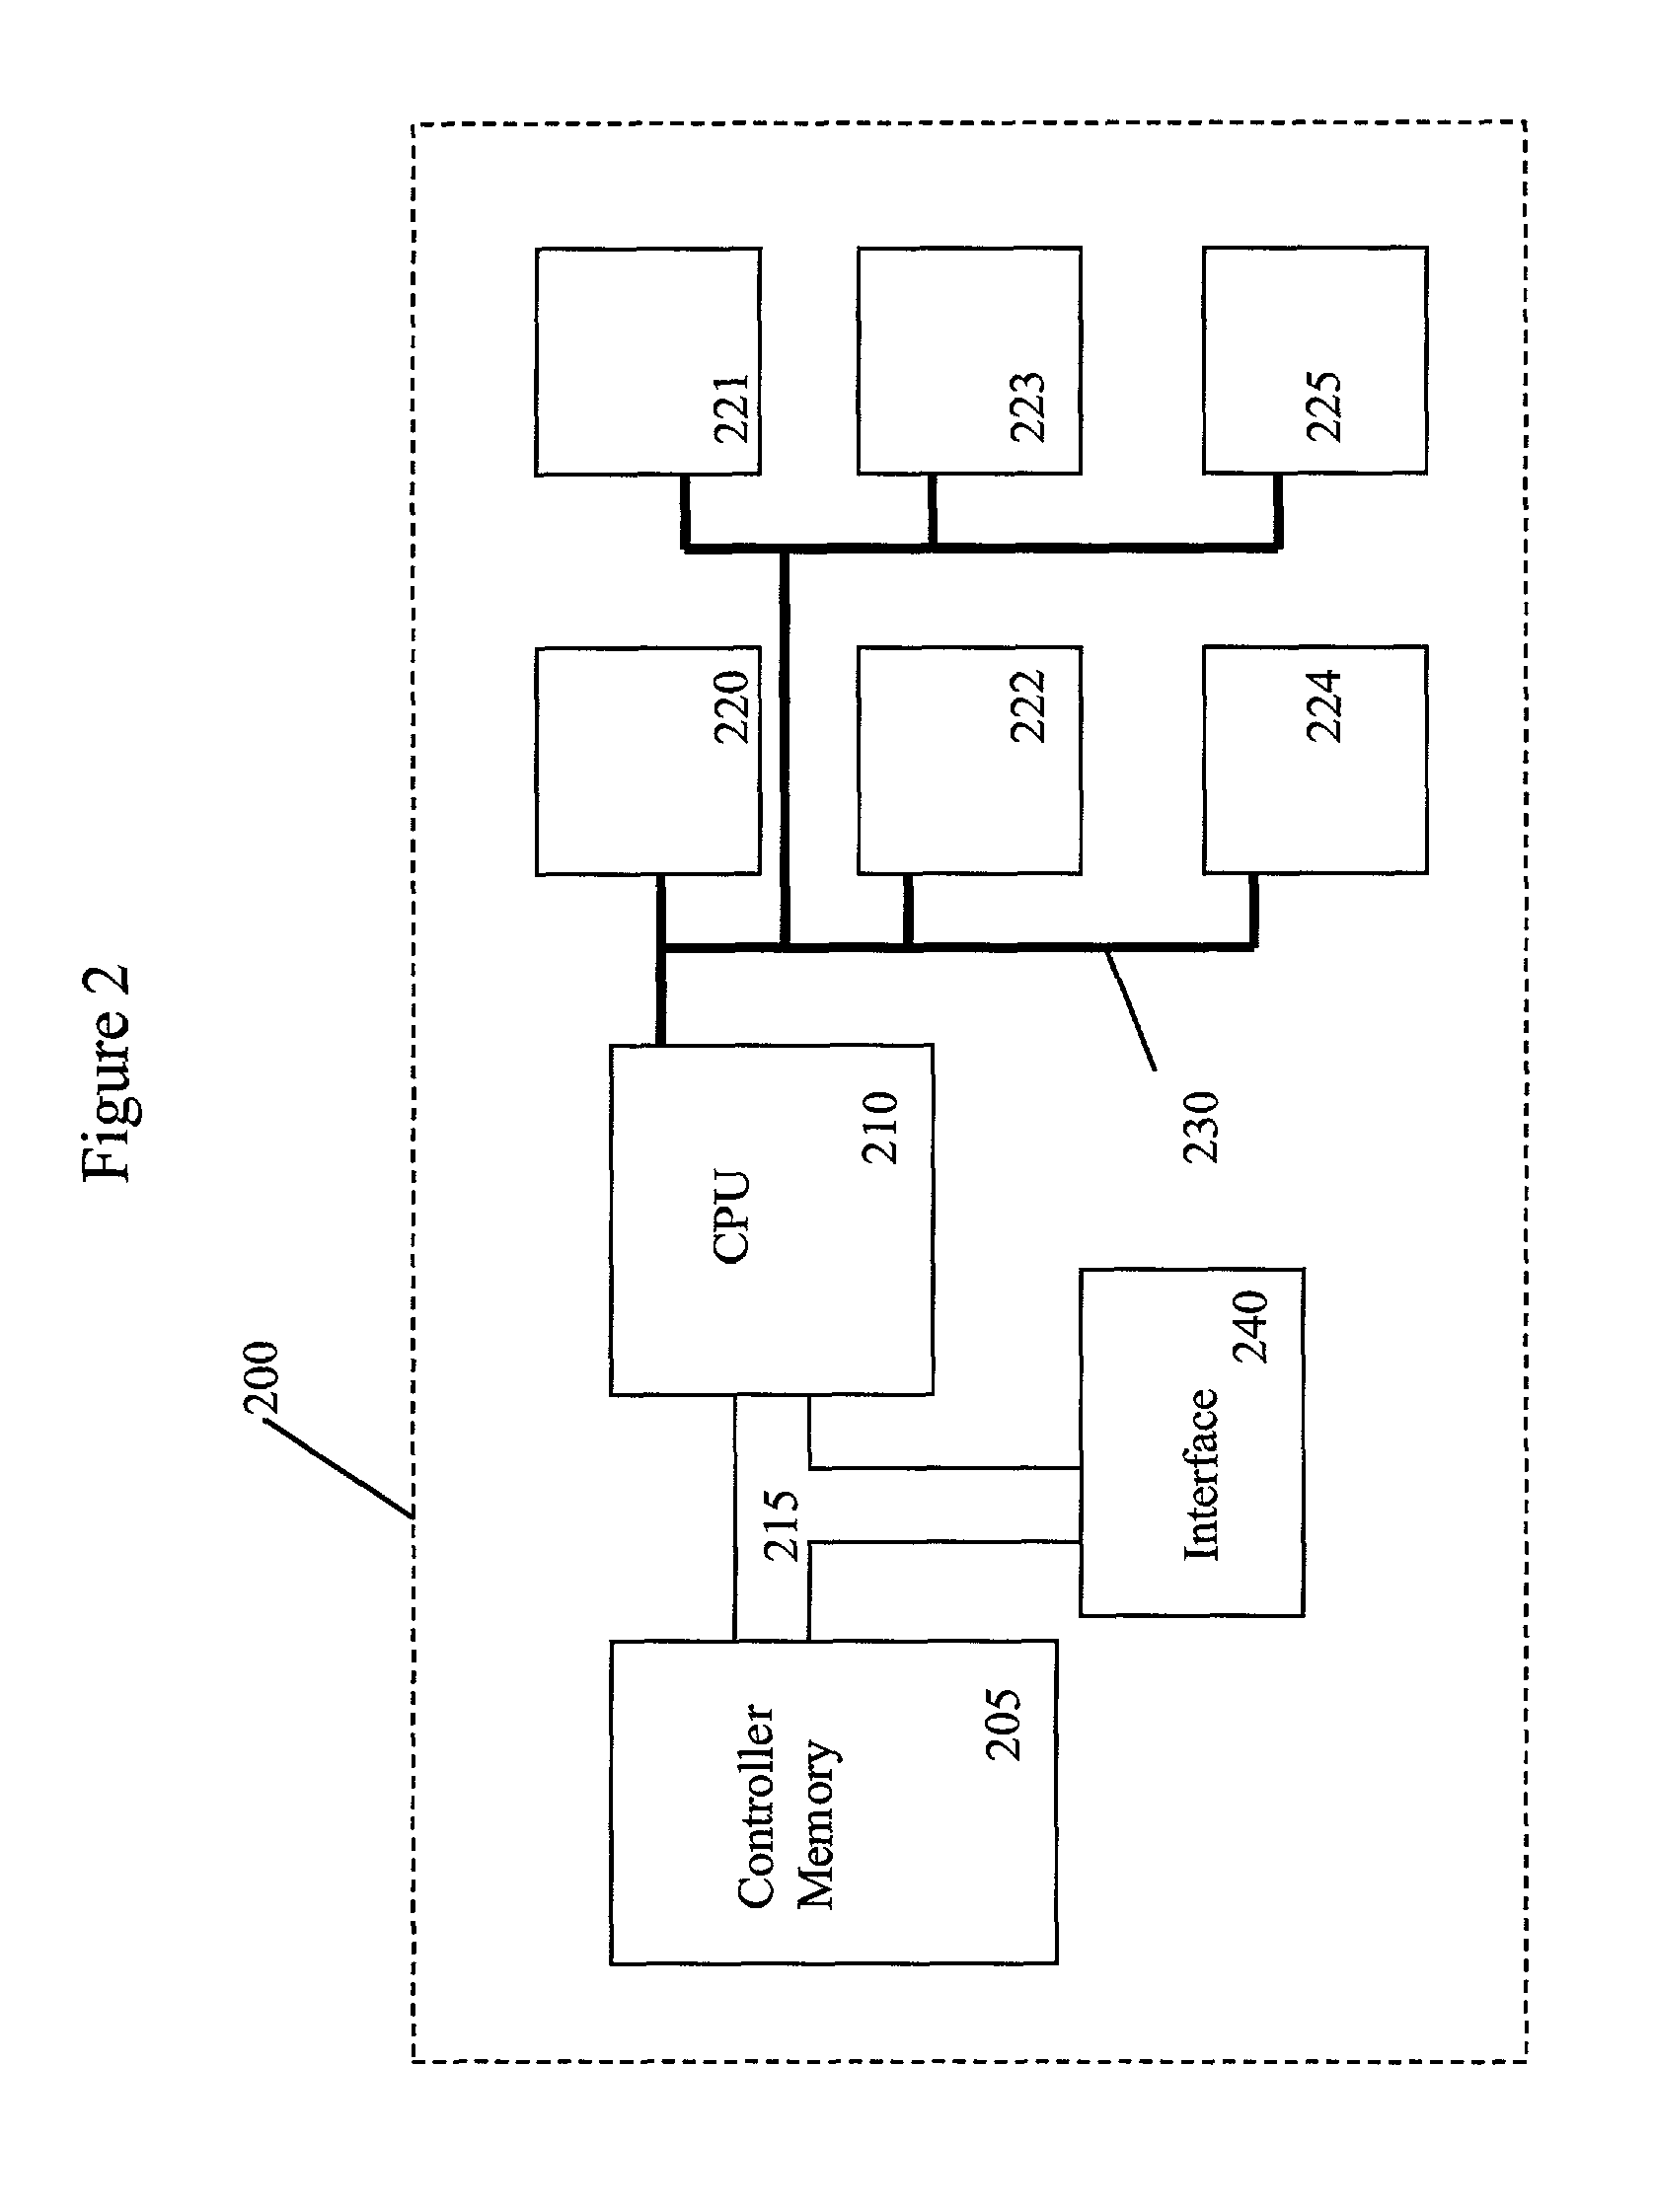 System providing automatic source code generation for personalization and parameterization of user modules